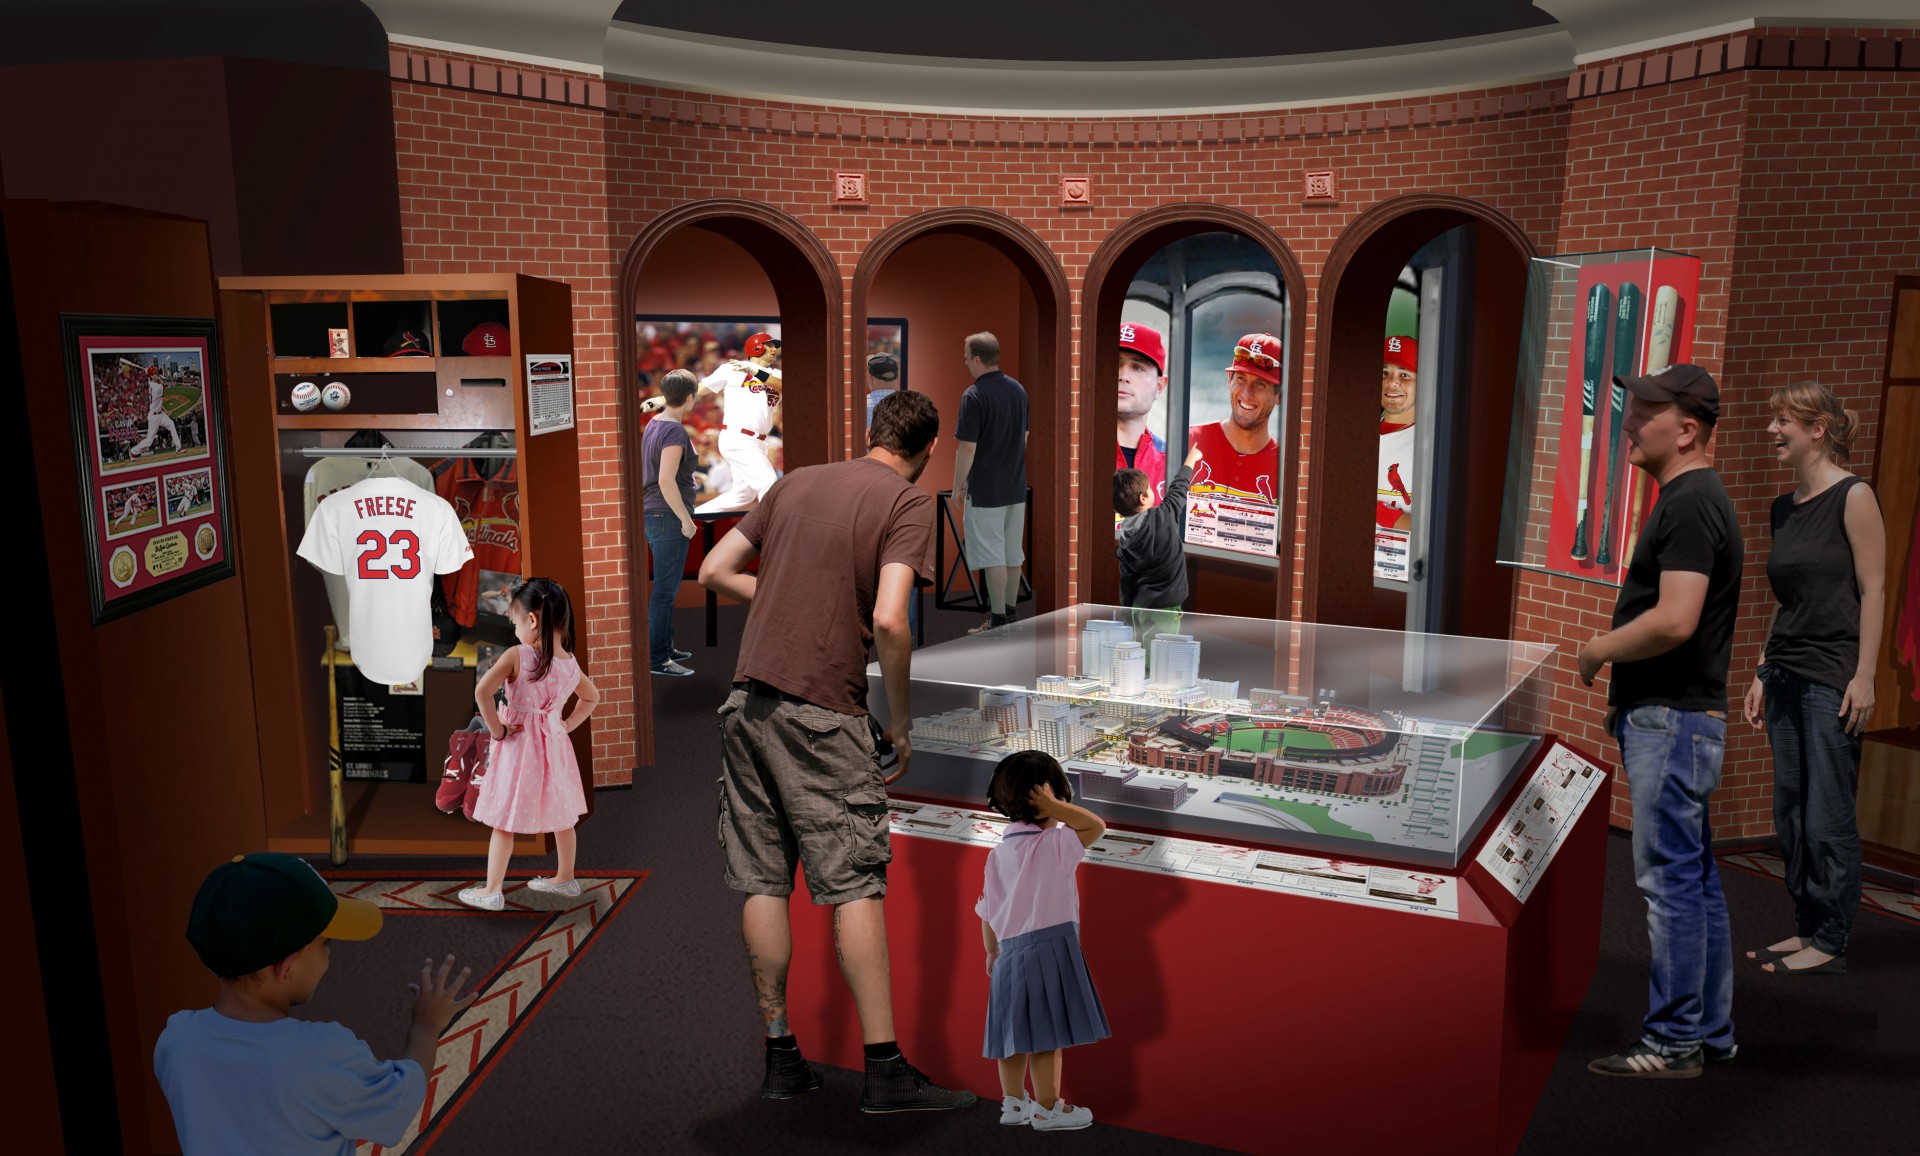 St. Louis Cardinals Hall of Fame and Museum Now Open | PGAV